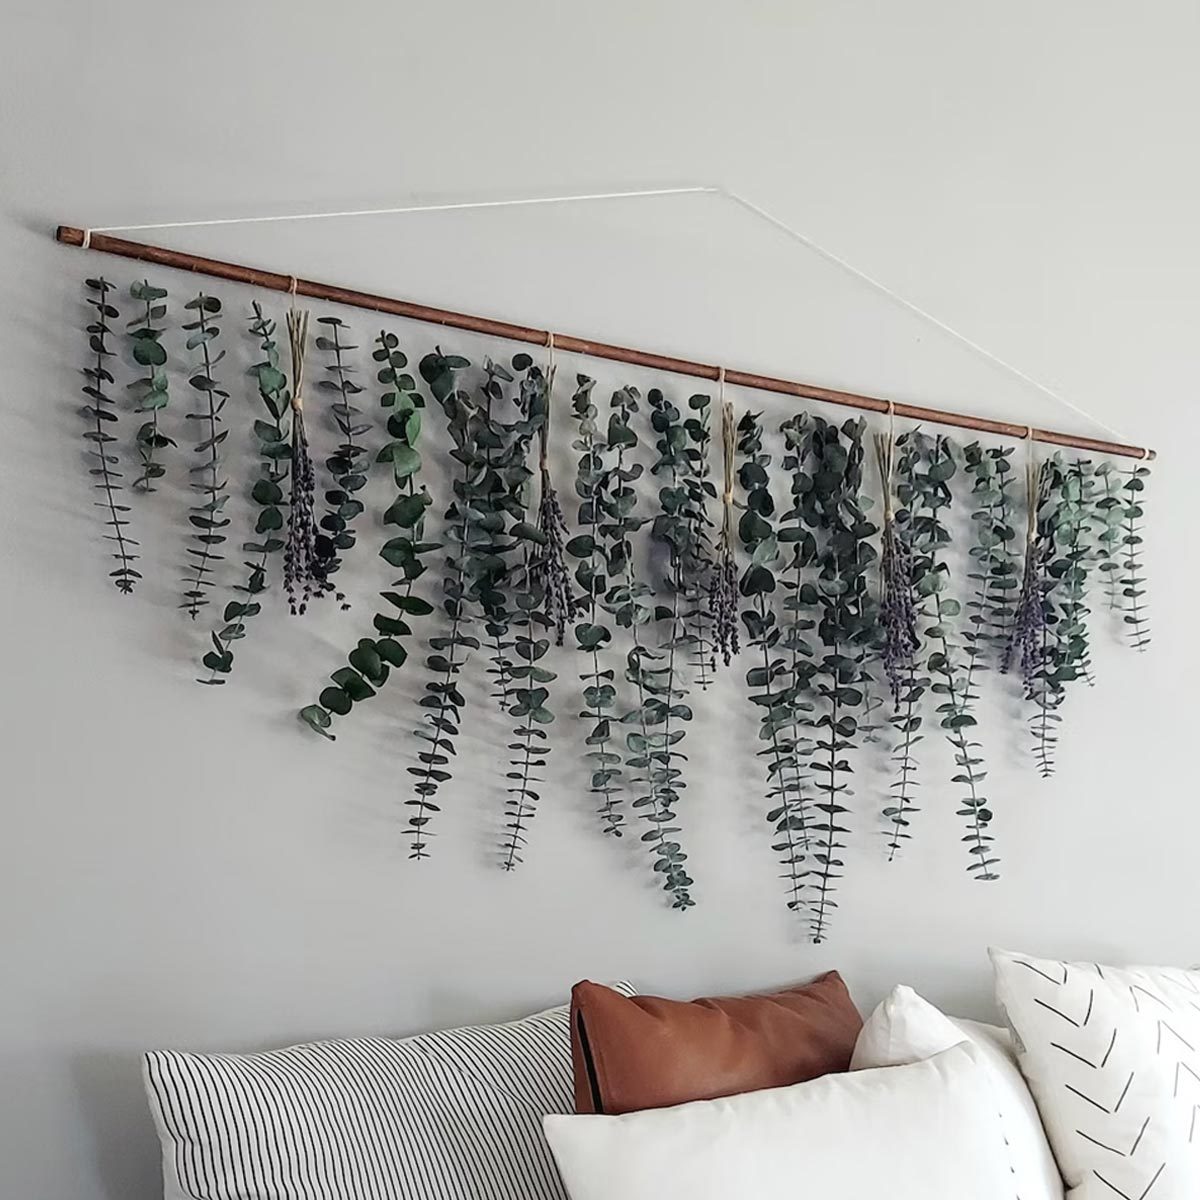 10 Ideas for Decorating Your Walls with Plants